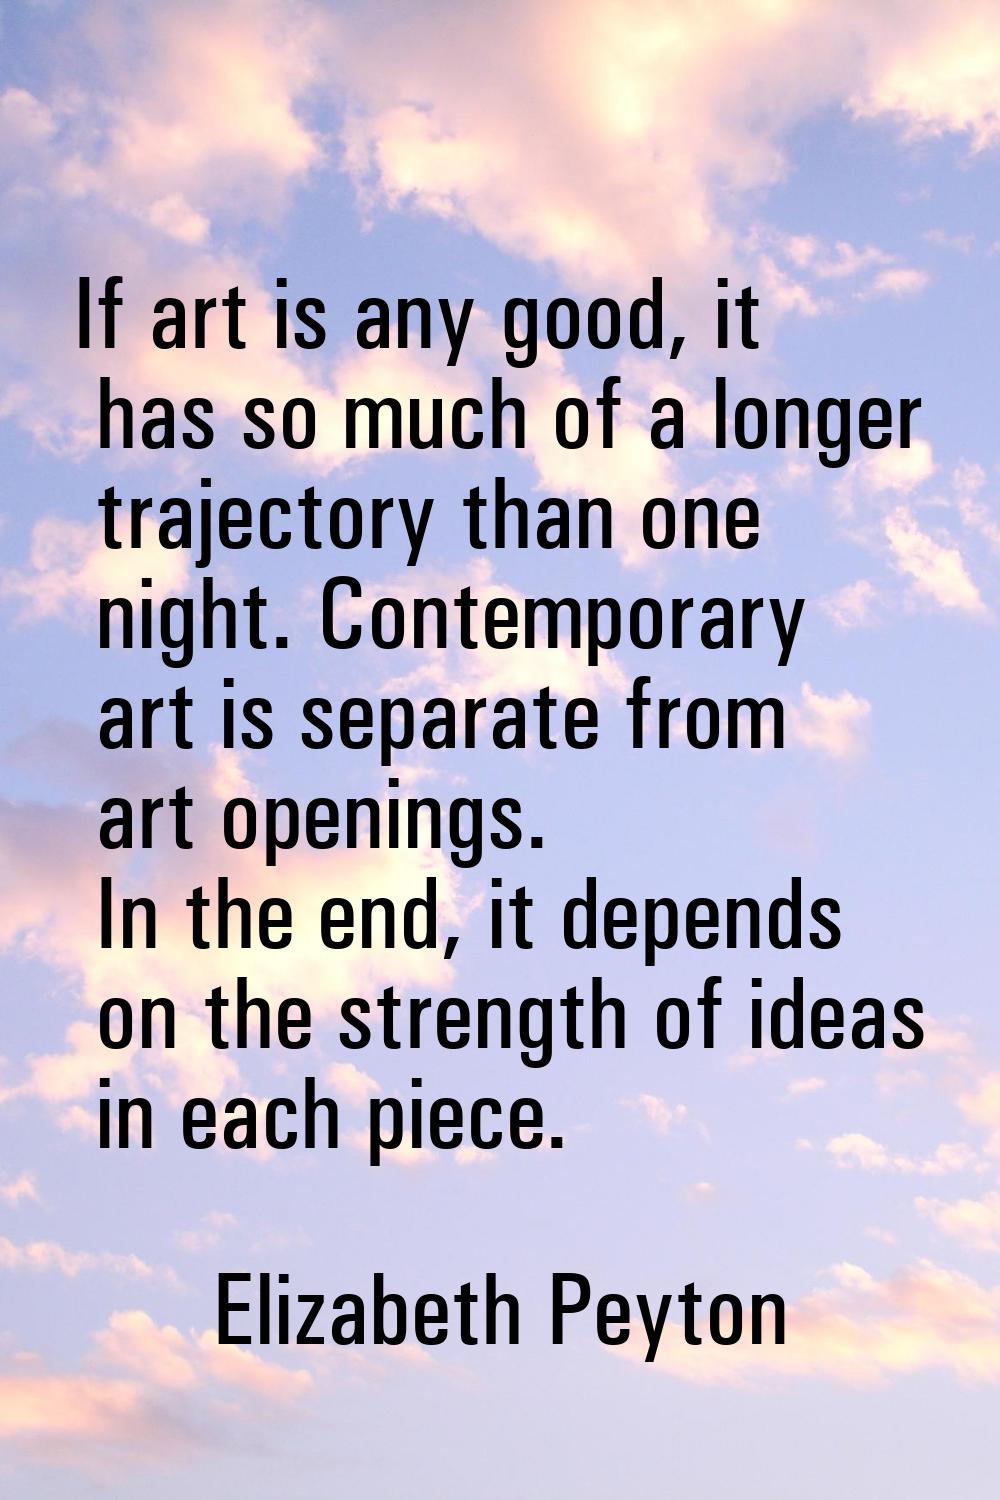 If art is any good, it has so much of a longer trajectory than one night. Contemporary art is separ